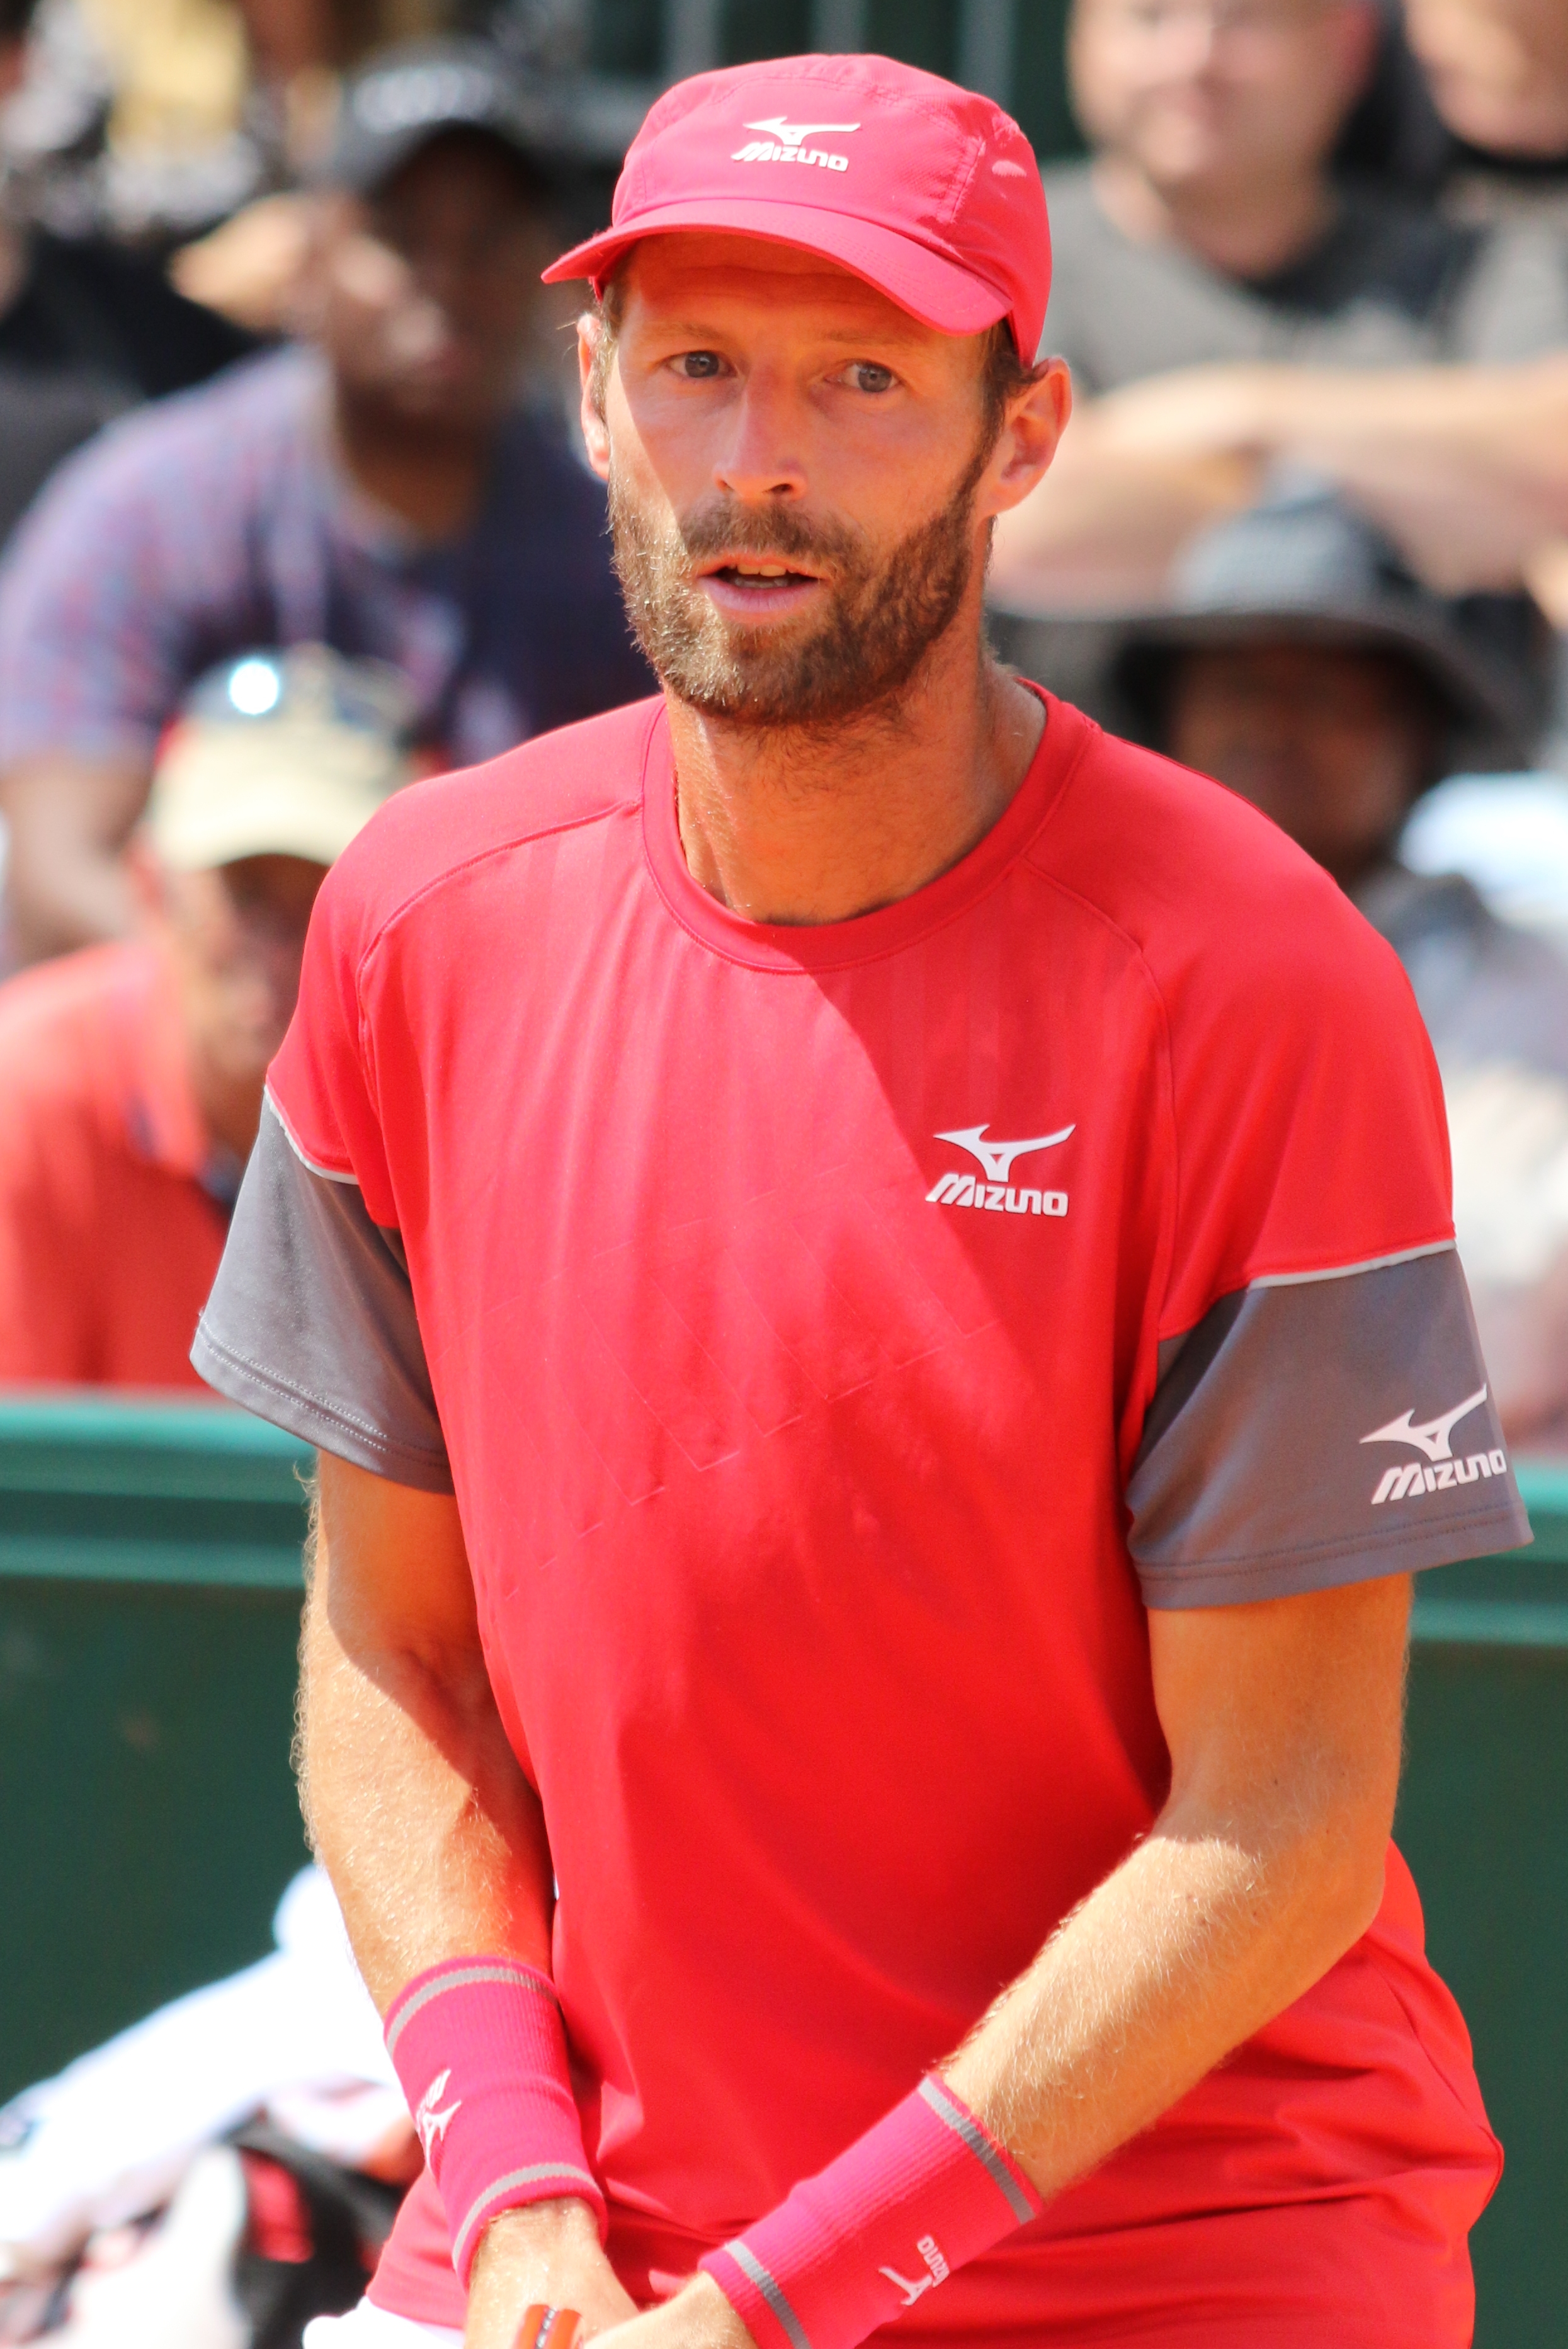 Robert at the [[2018 French Open]]